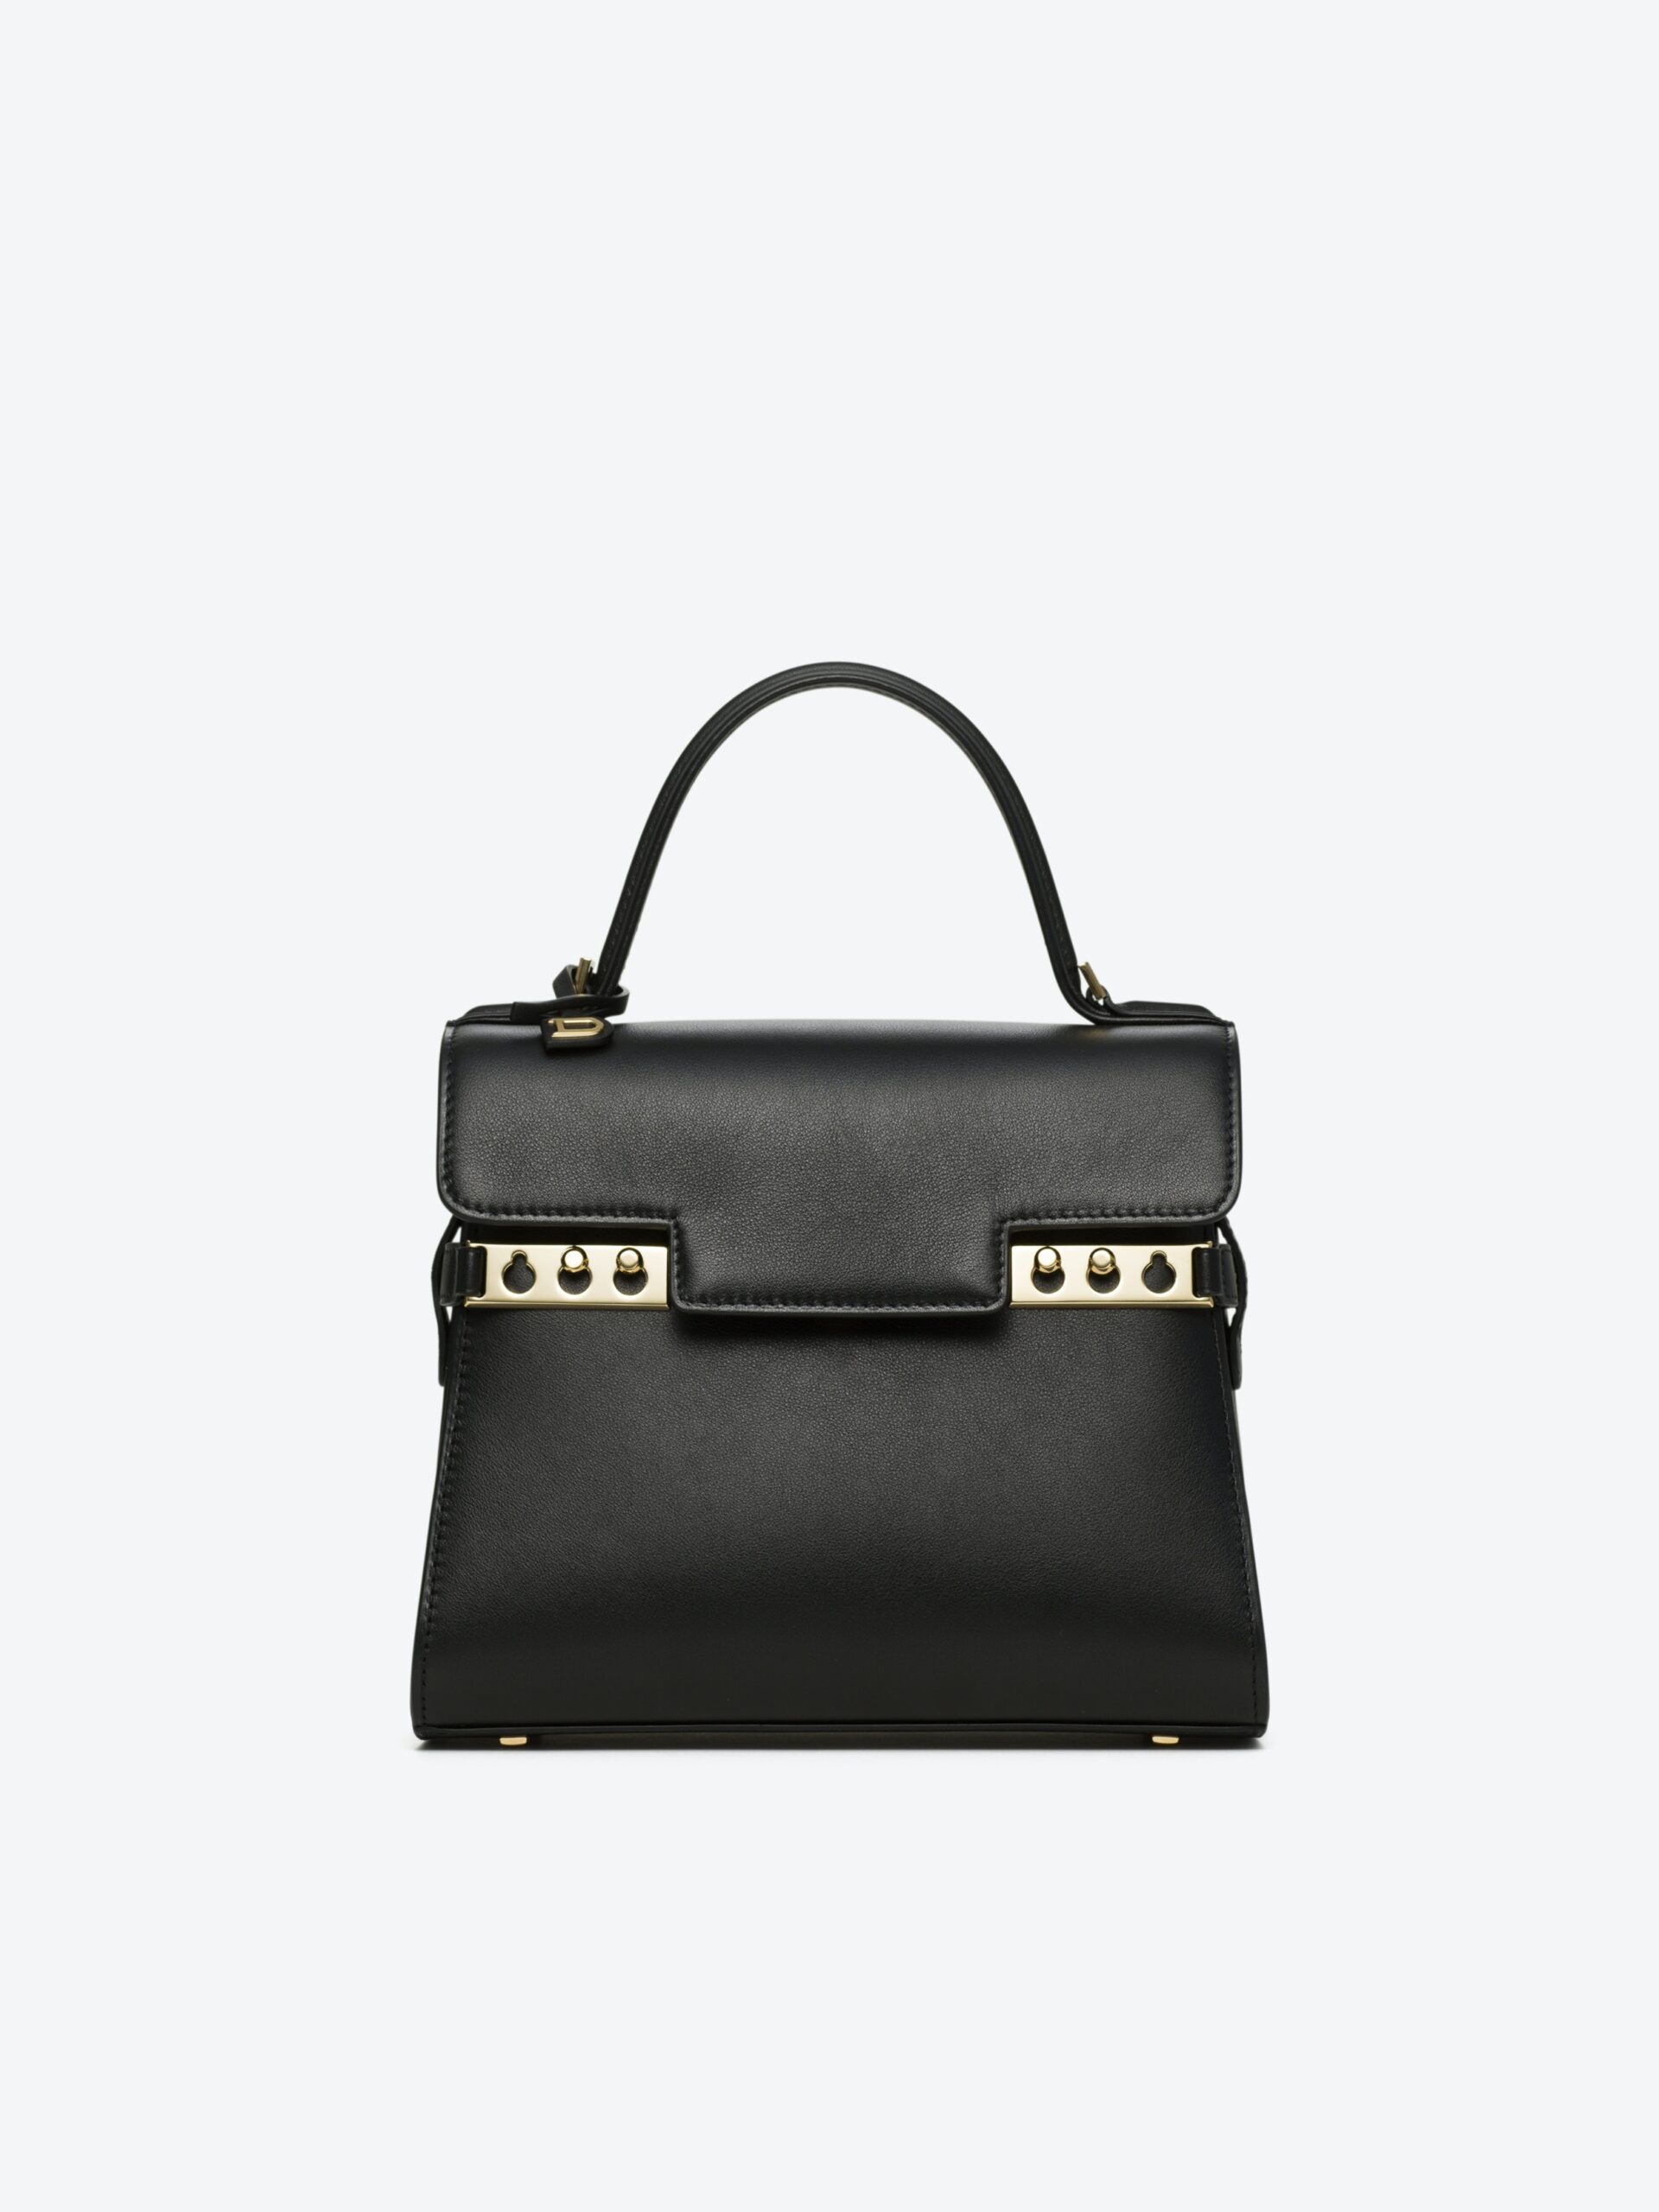 10 Designer Bags That Are the Epitome of Chic - luxfy